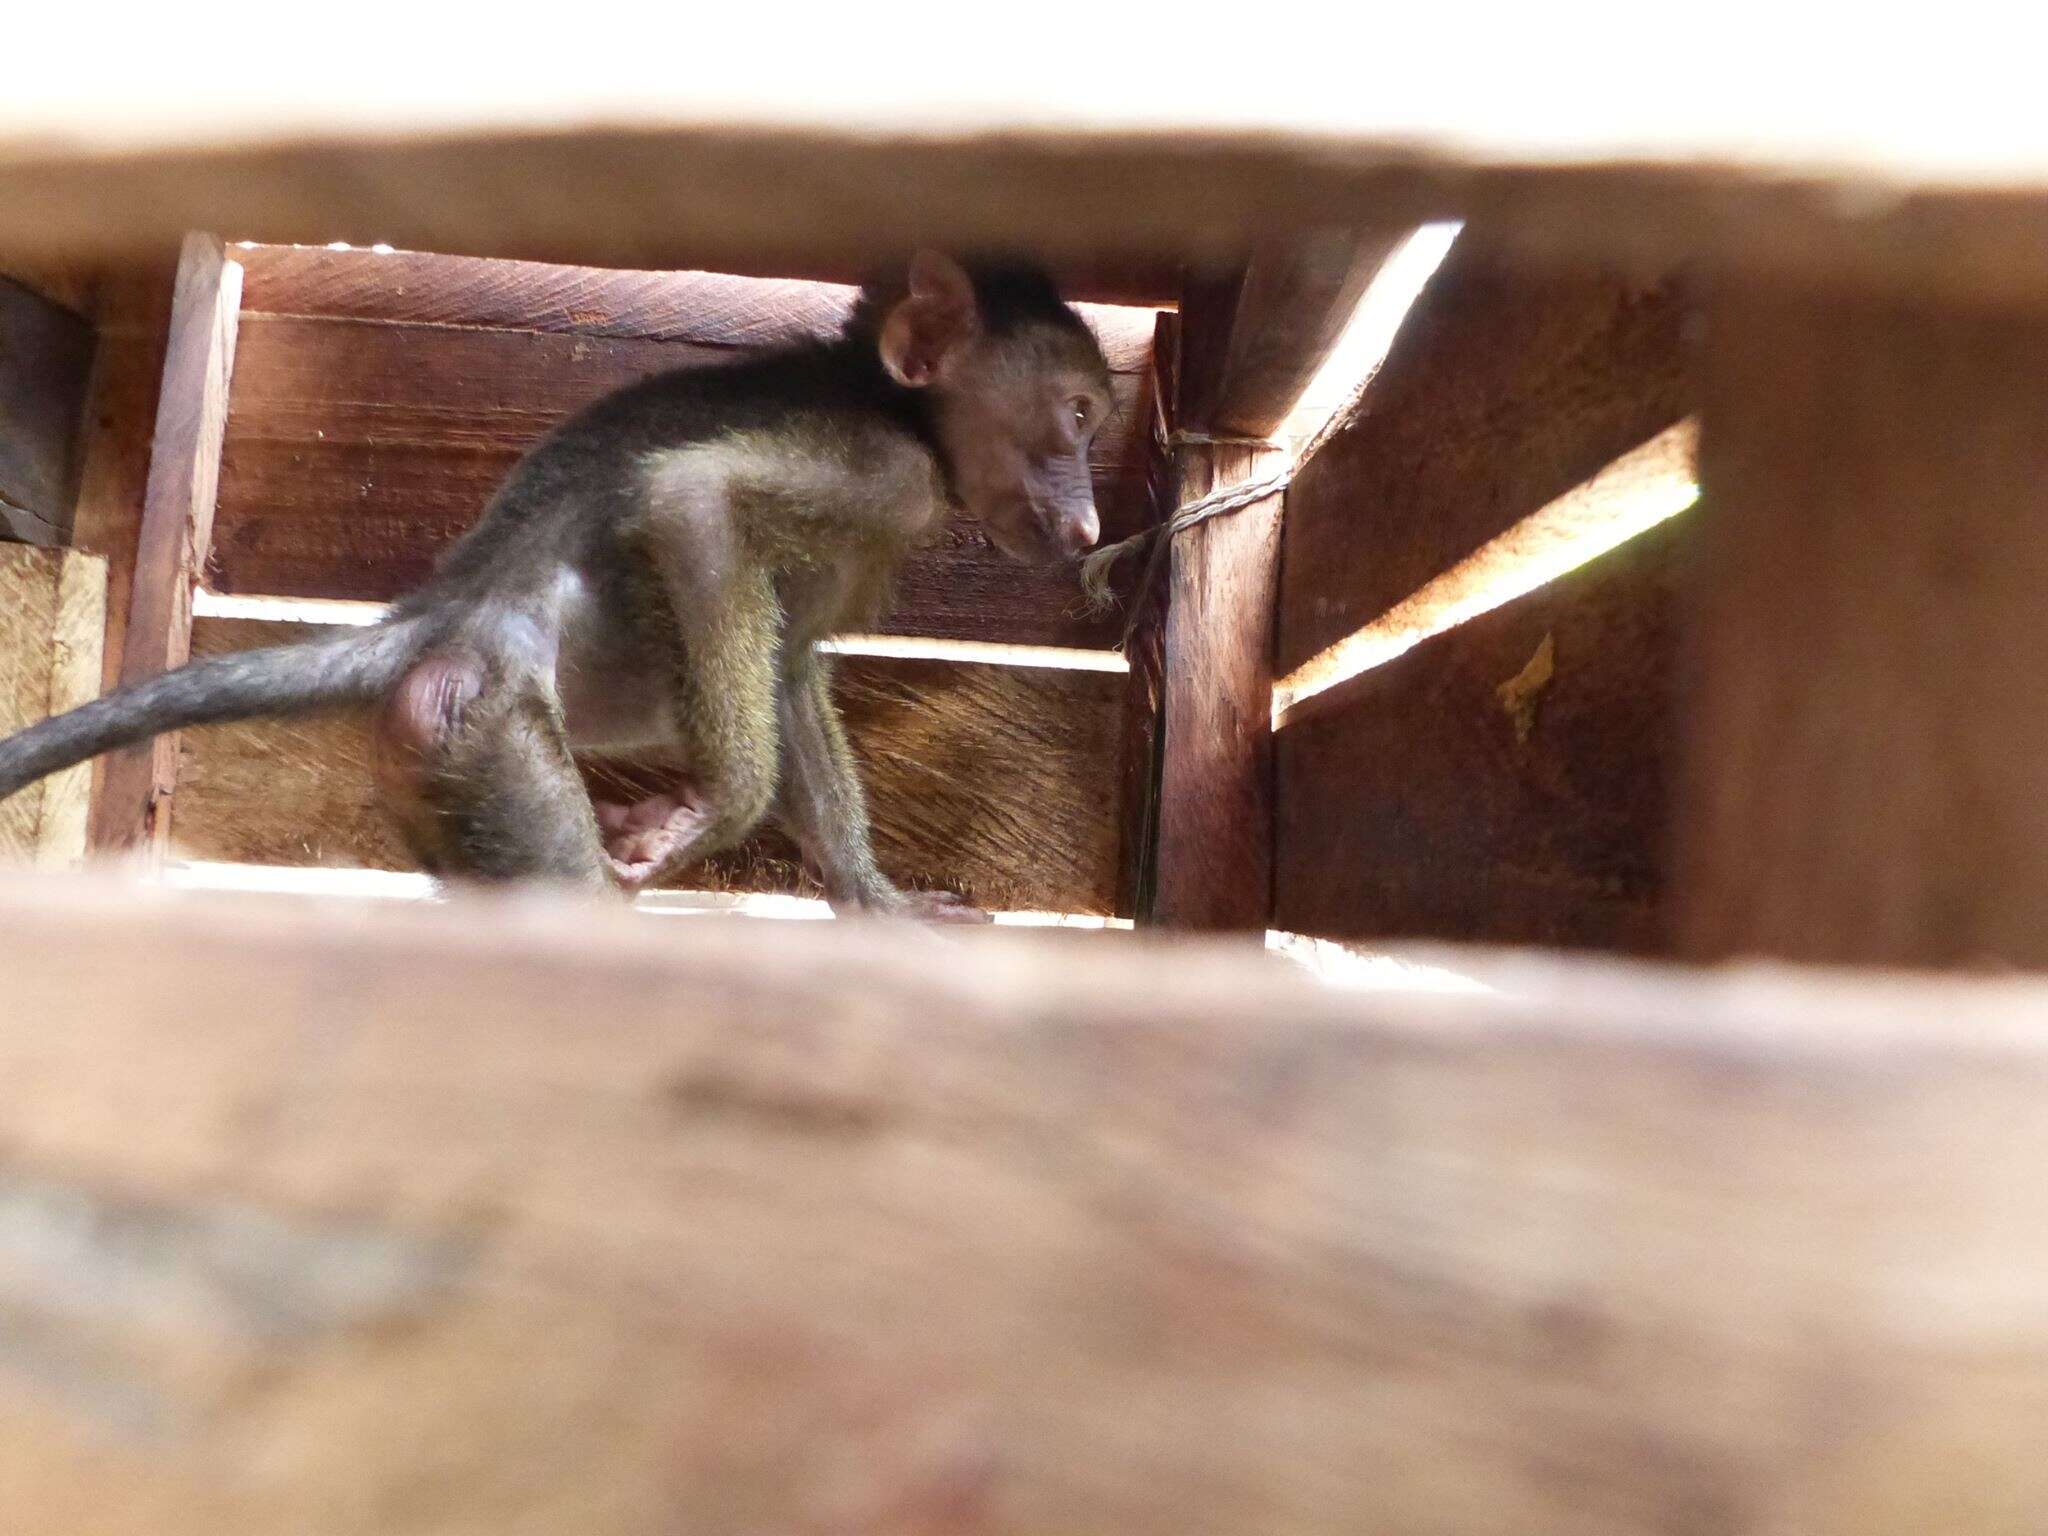 Baboon in crate